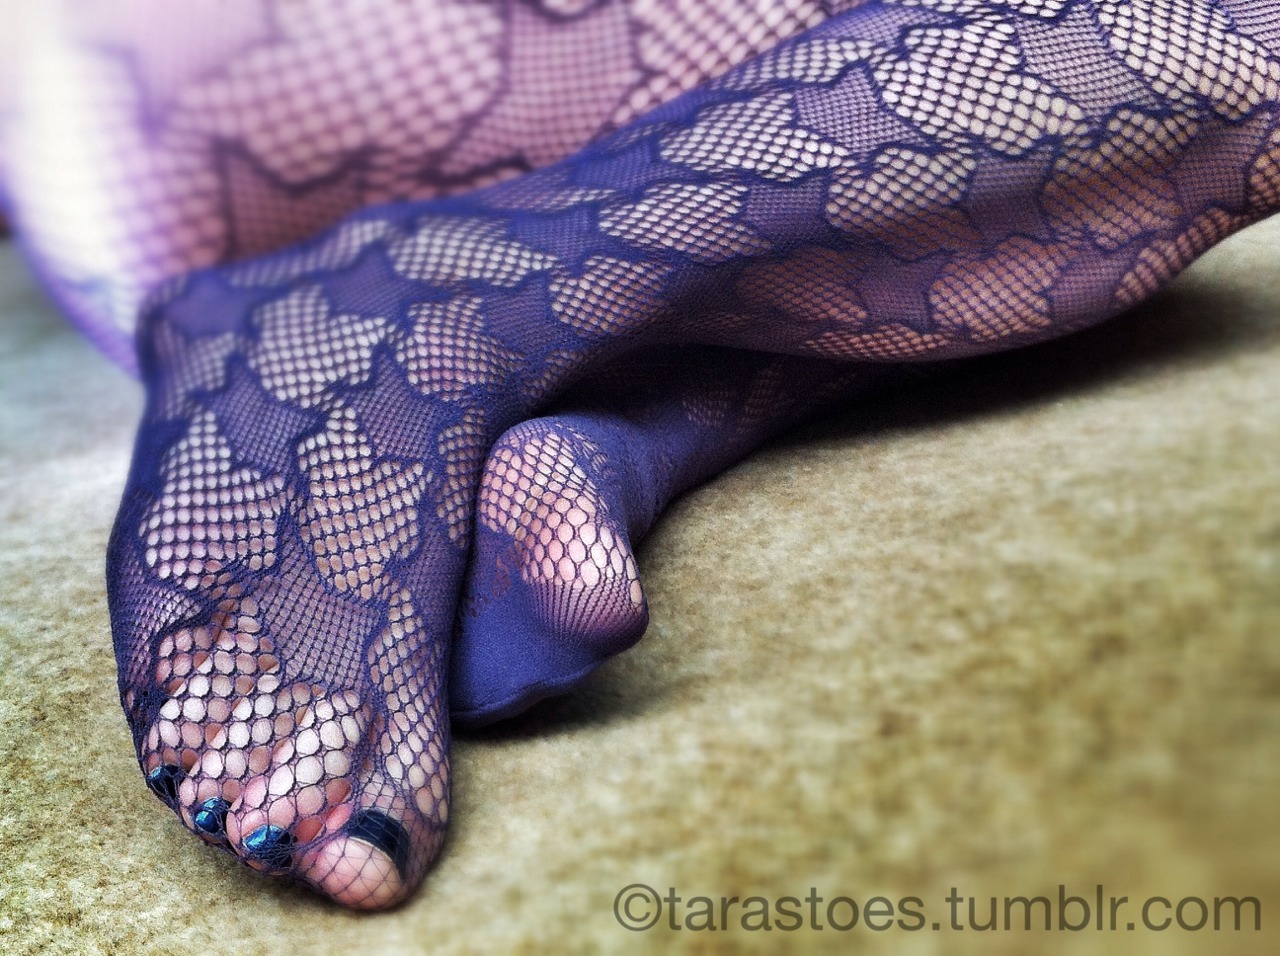 Tarastoes New Tights Just For You Guys Feet